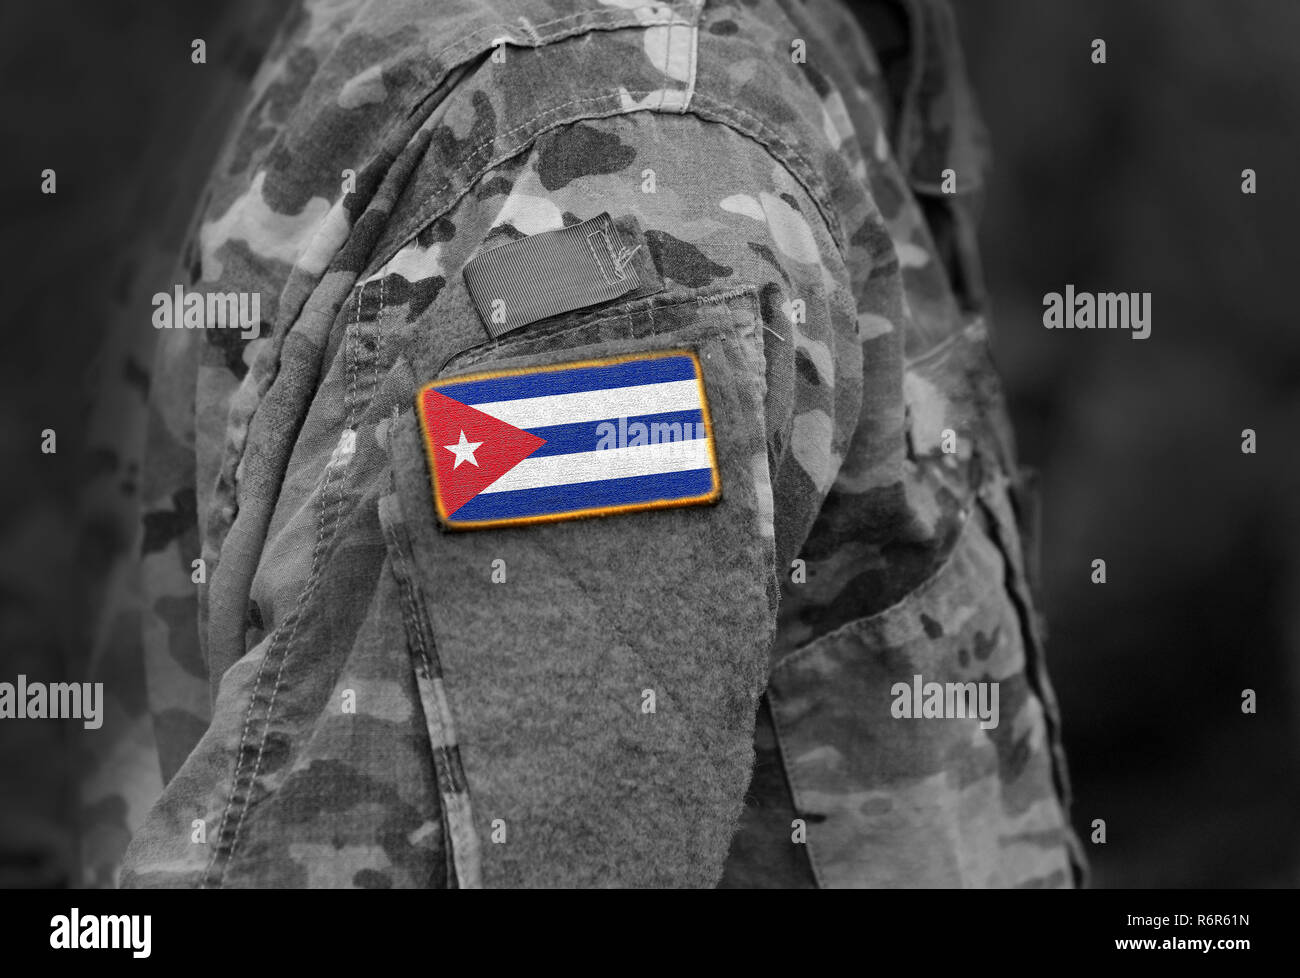 Flag of Cuba on soldiers arm. Flag of Cuba on military uniforms (collage). Stock Photo